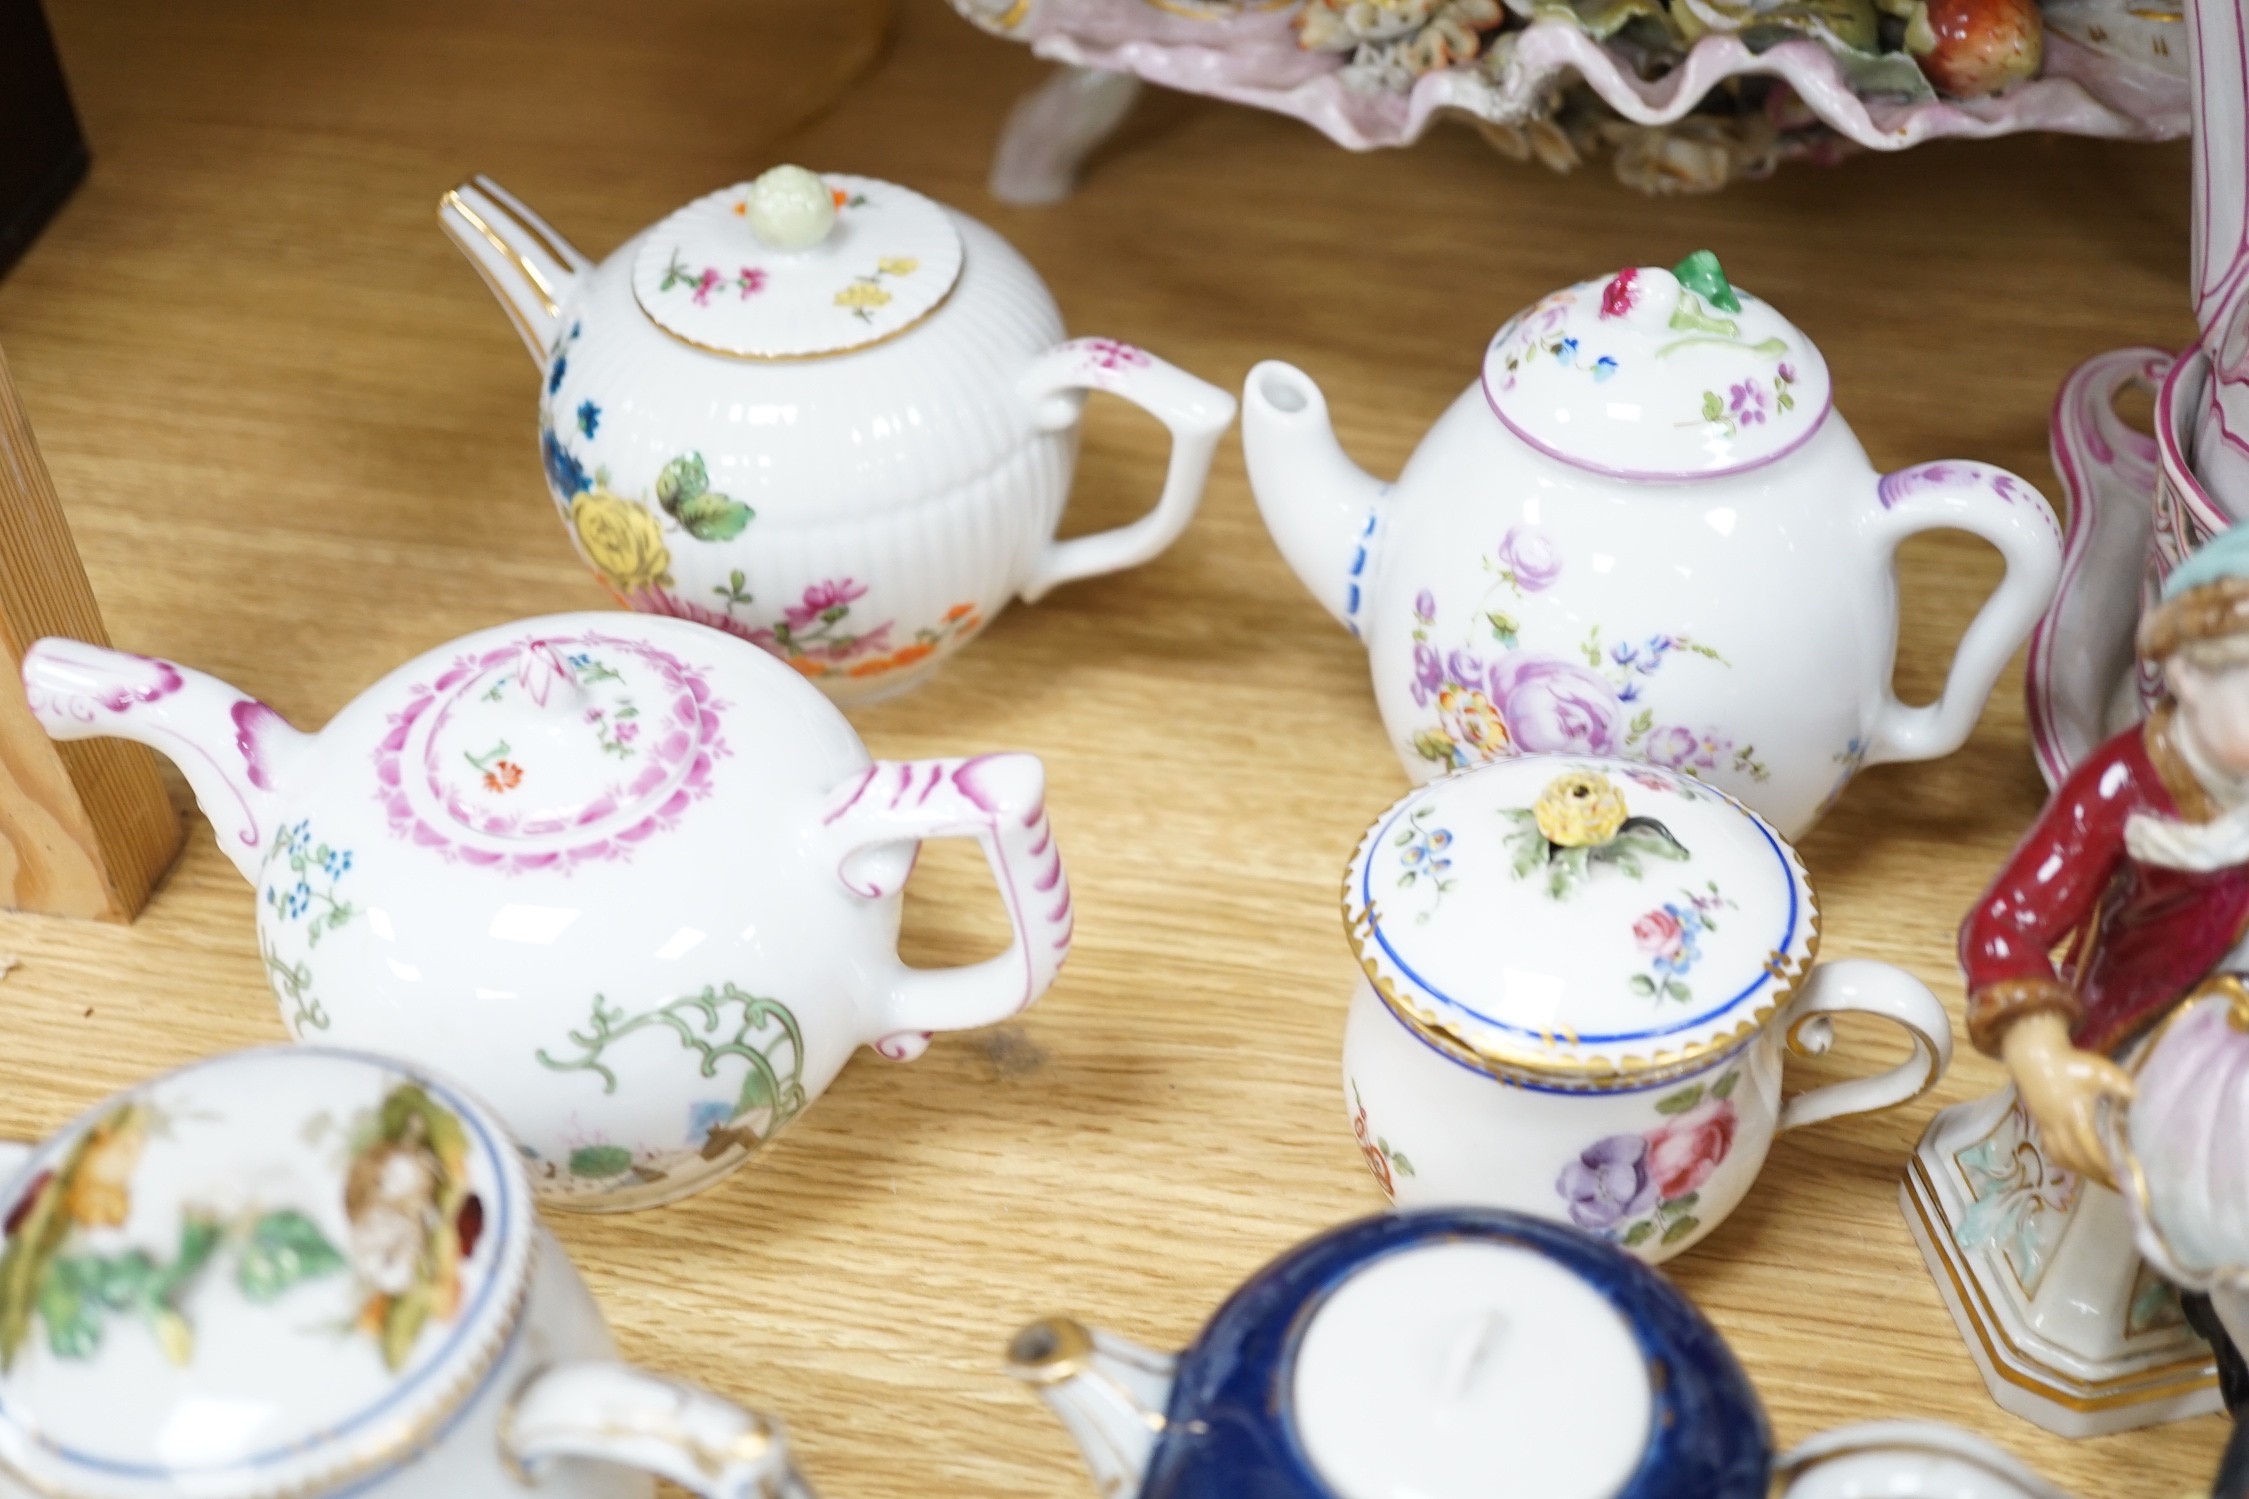 A mixed collection of 19th century and later continental porcelain